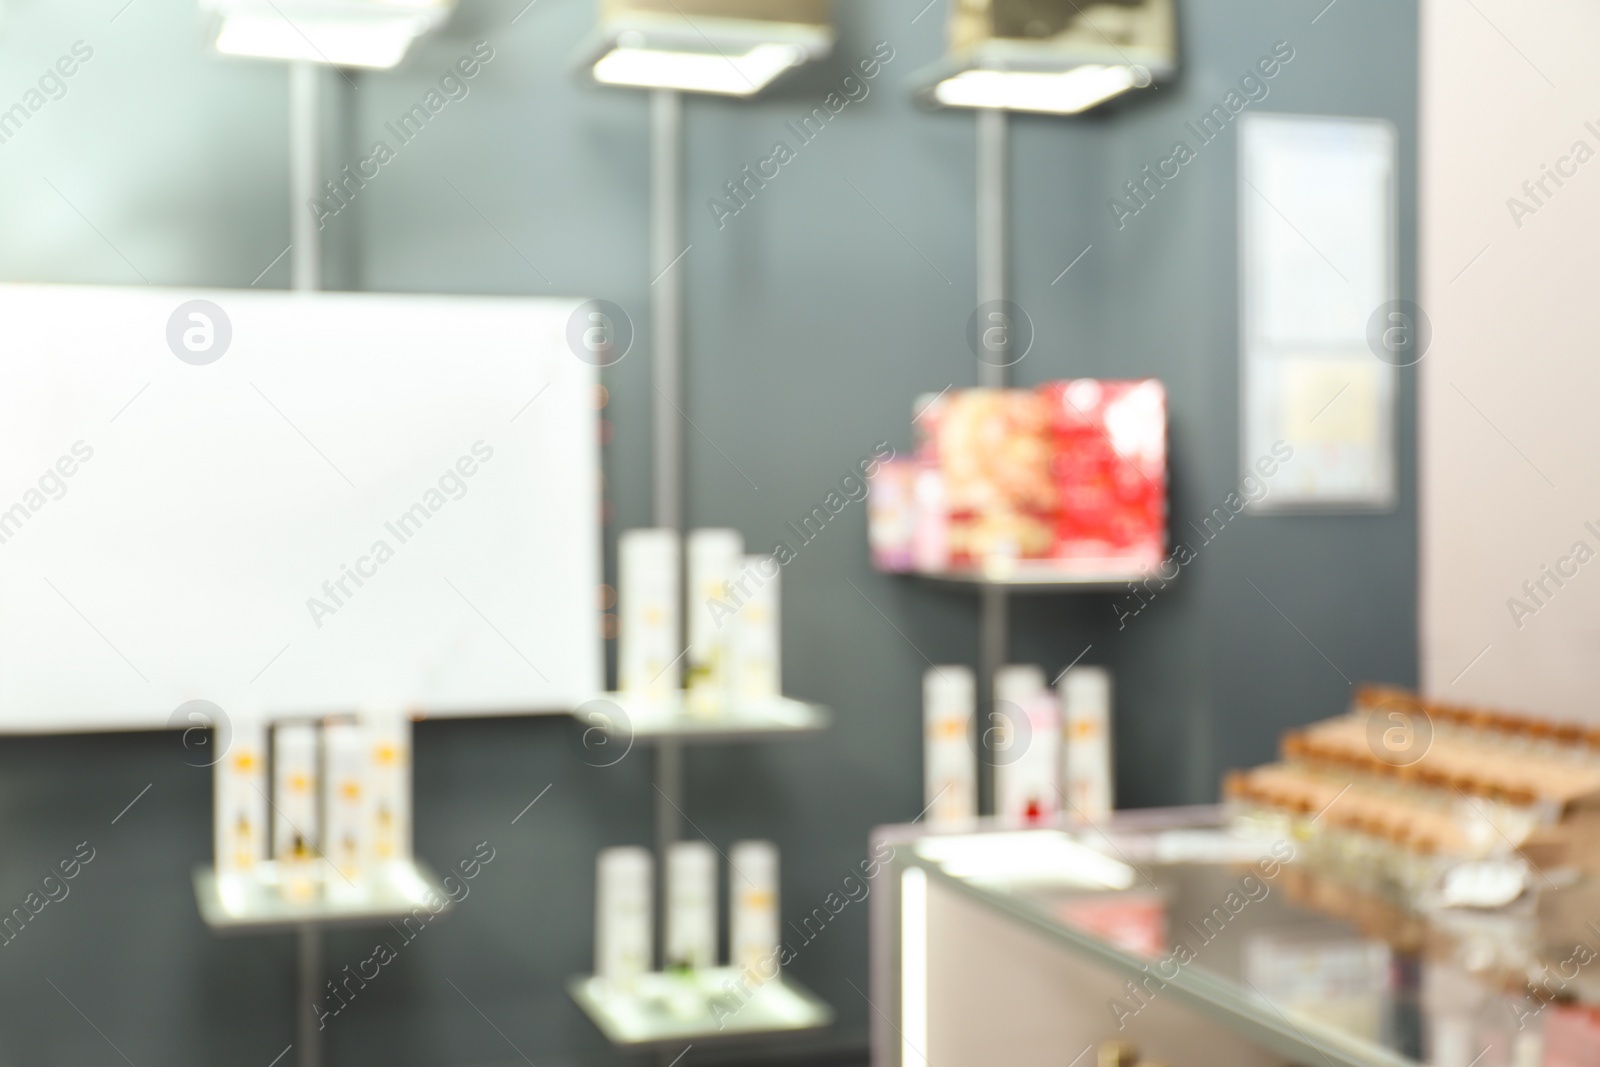 Photo of Blurred view of shelves with perfume bottles in shop